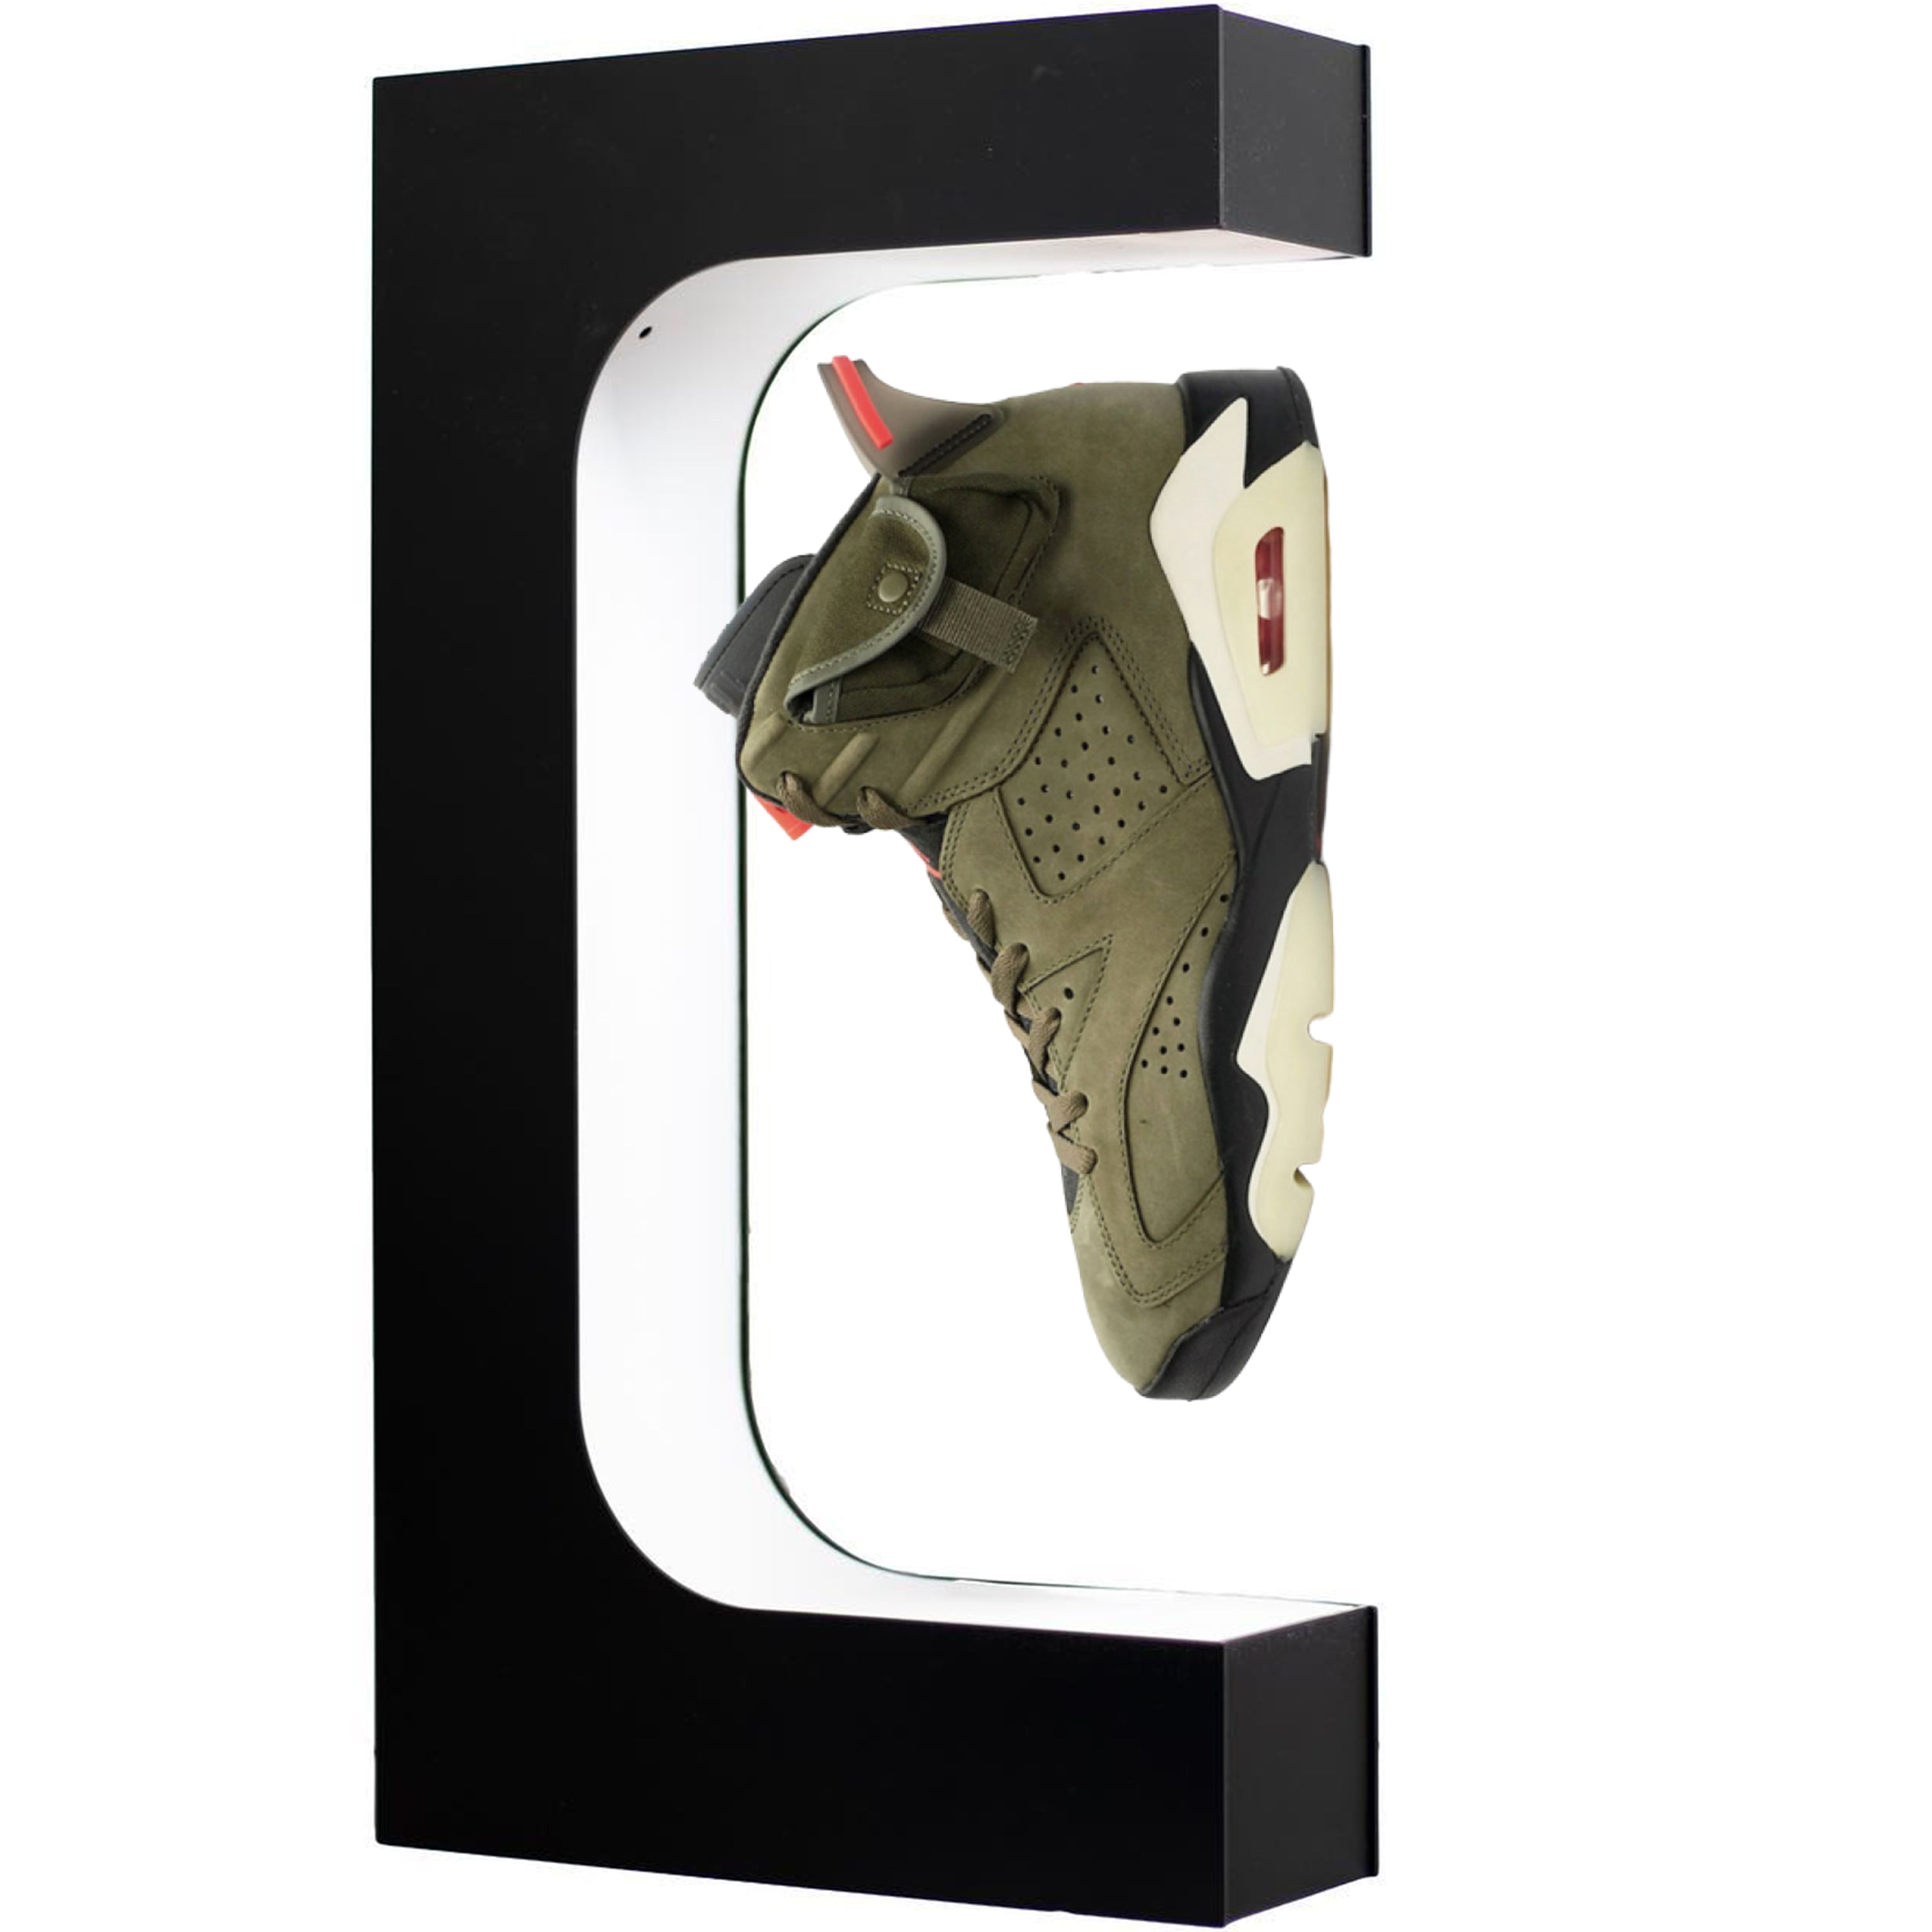 X-Float Levitating Shoe Display Floating Sneaker Stand